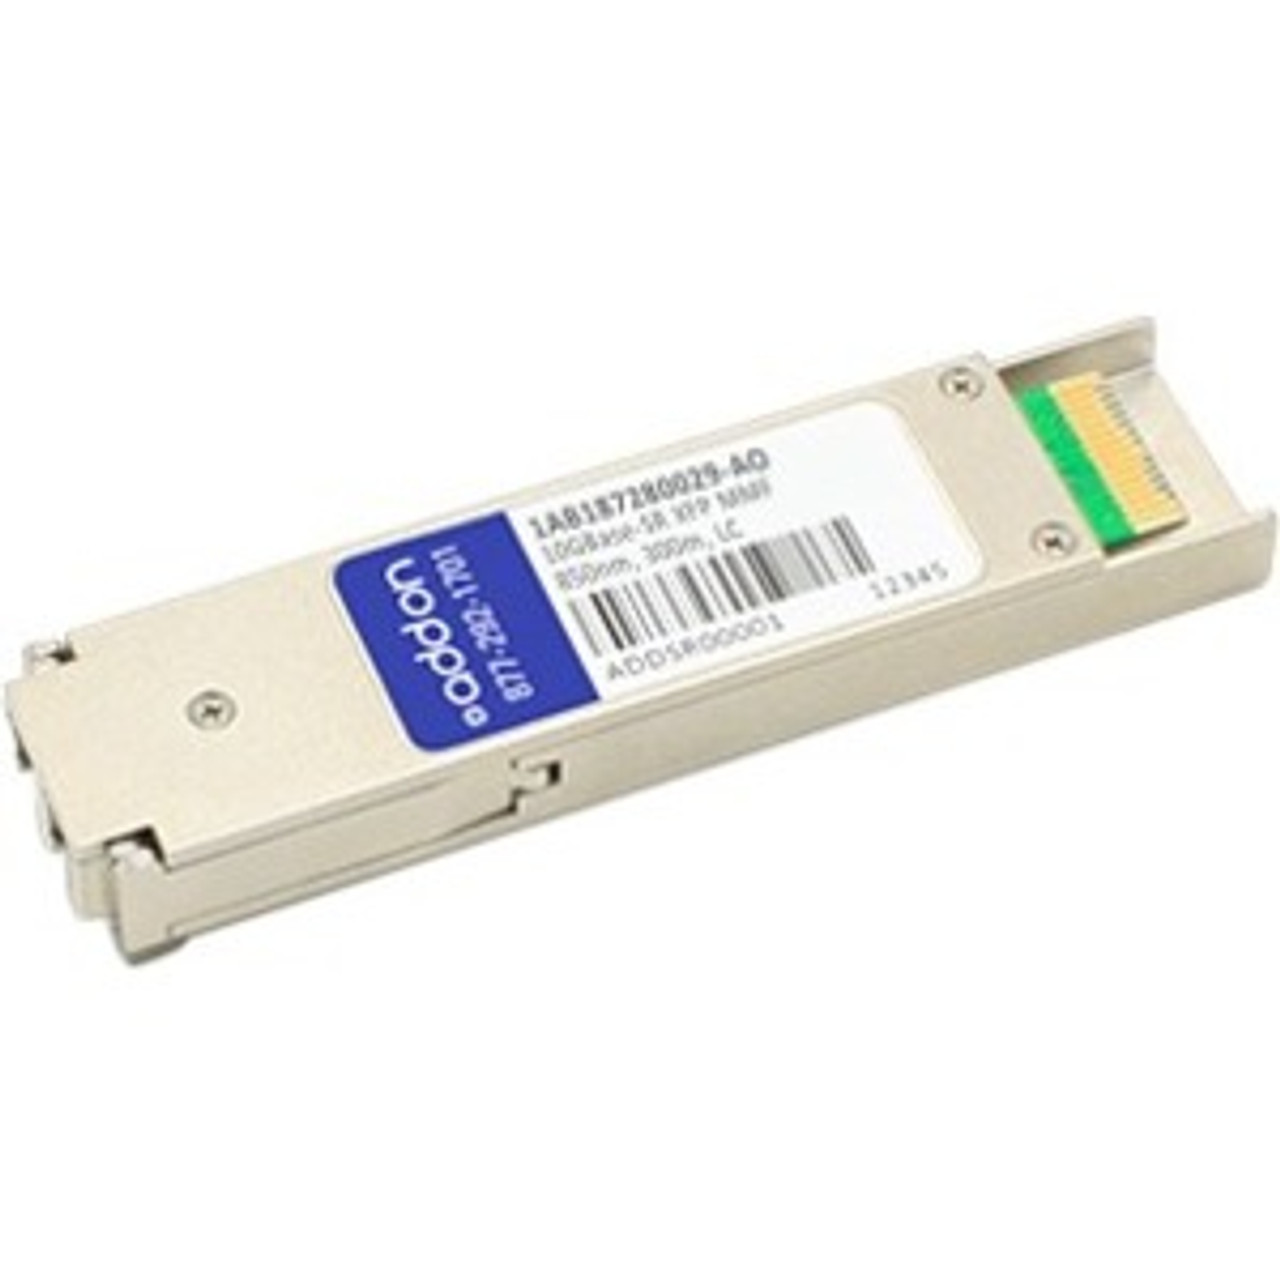 1AB187280029-AO AddOn 1Gbps 1000Base-LX Single-mode Fiber 15km 1310nm LC Connector SFP Transceiver Module for Alcatel-Lucent Compatible